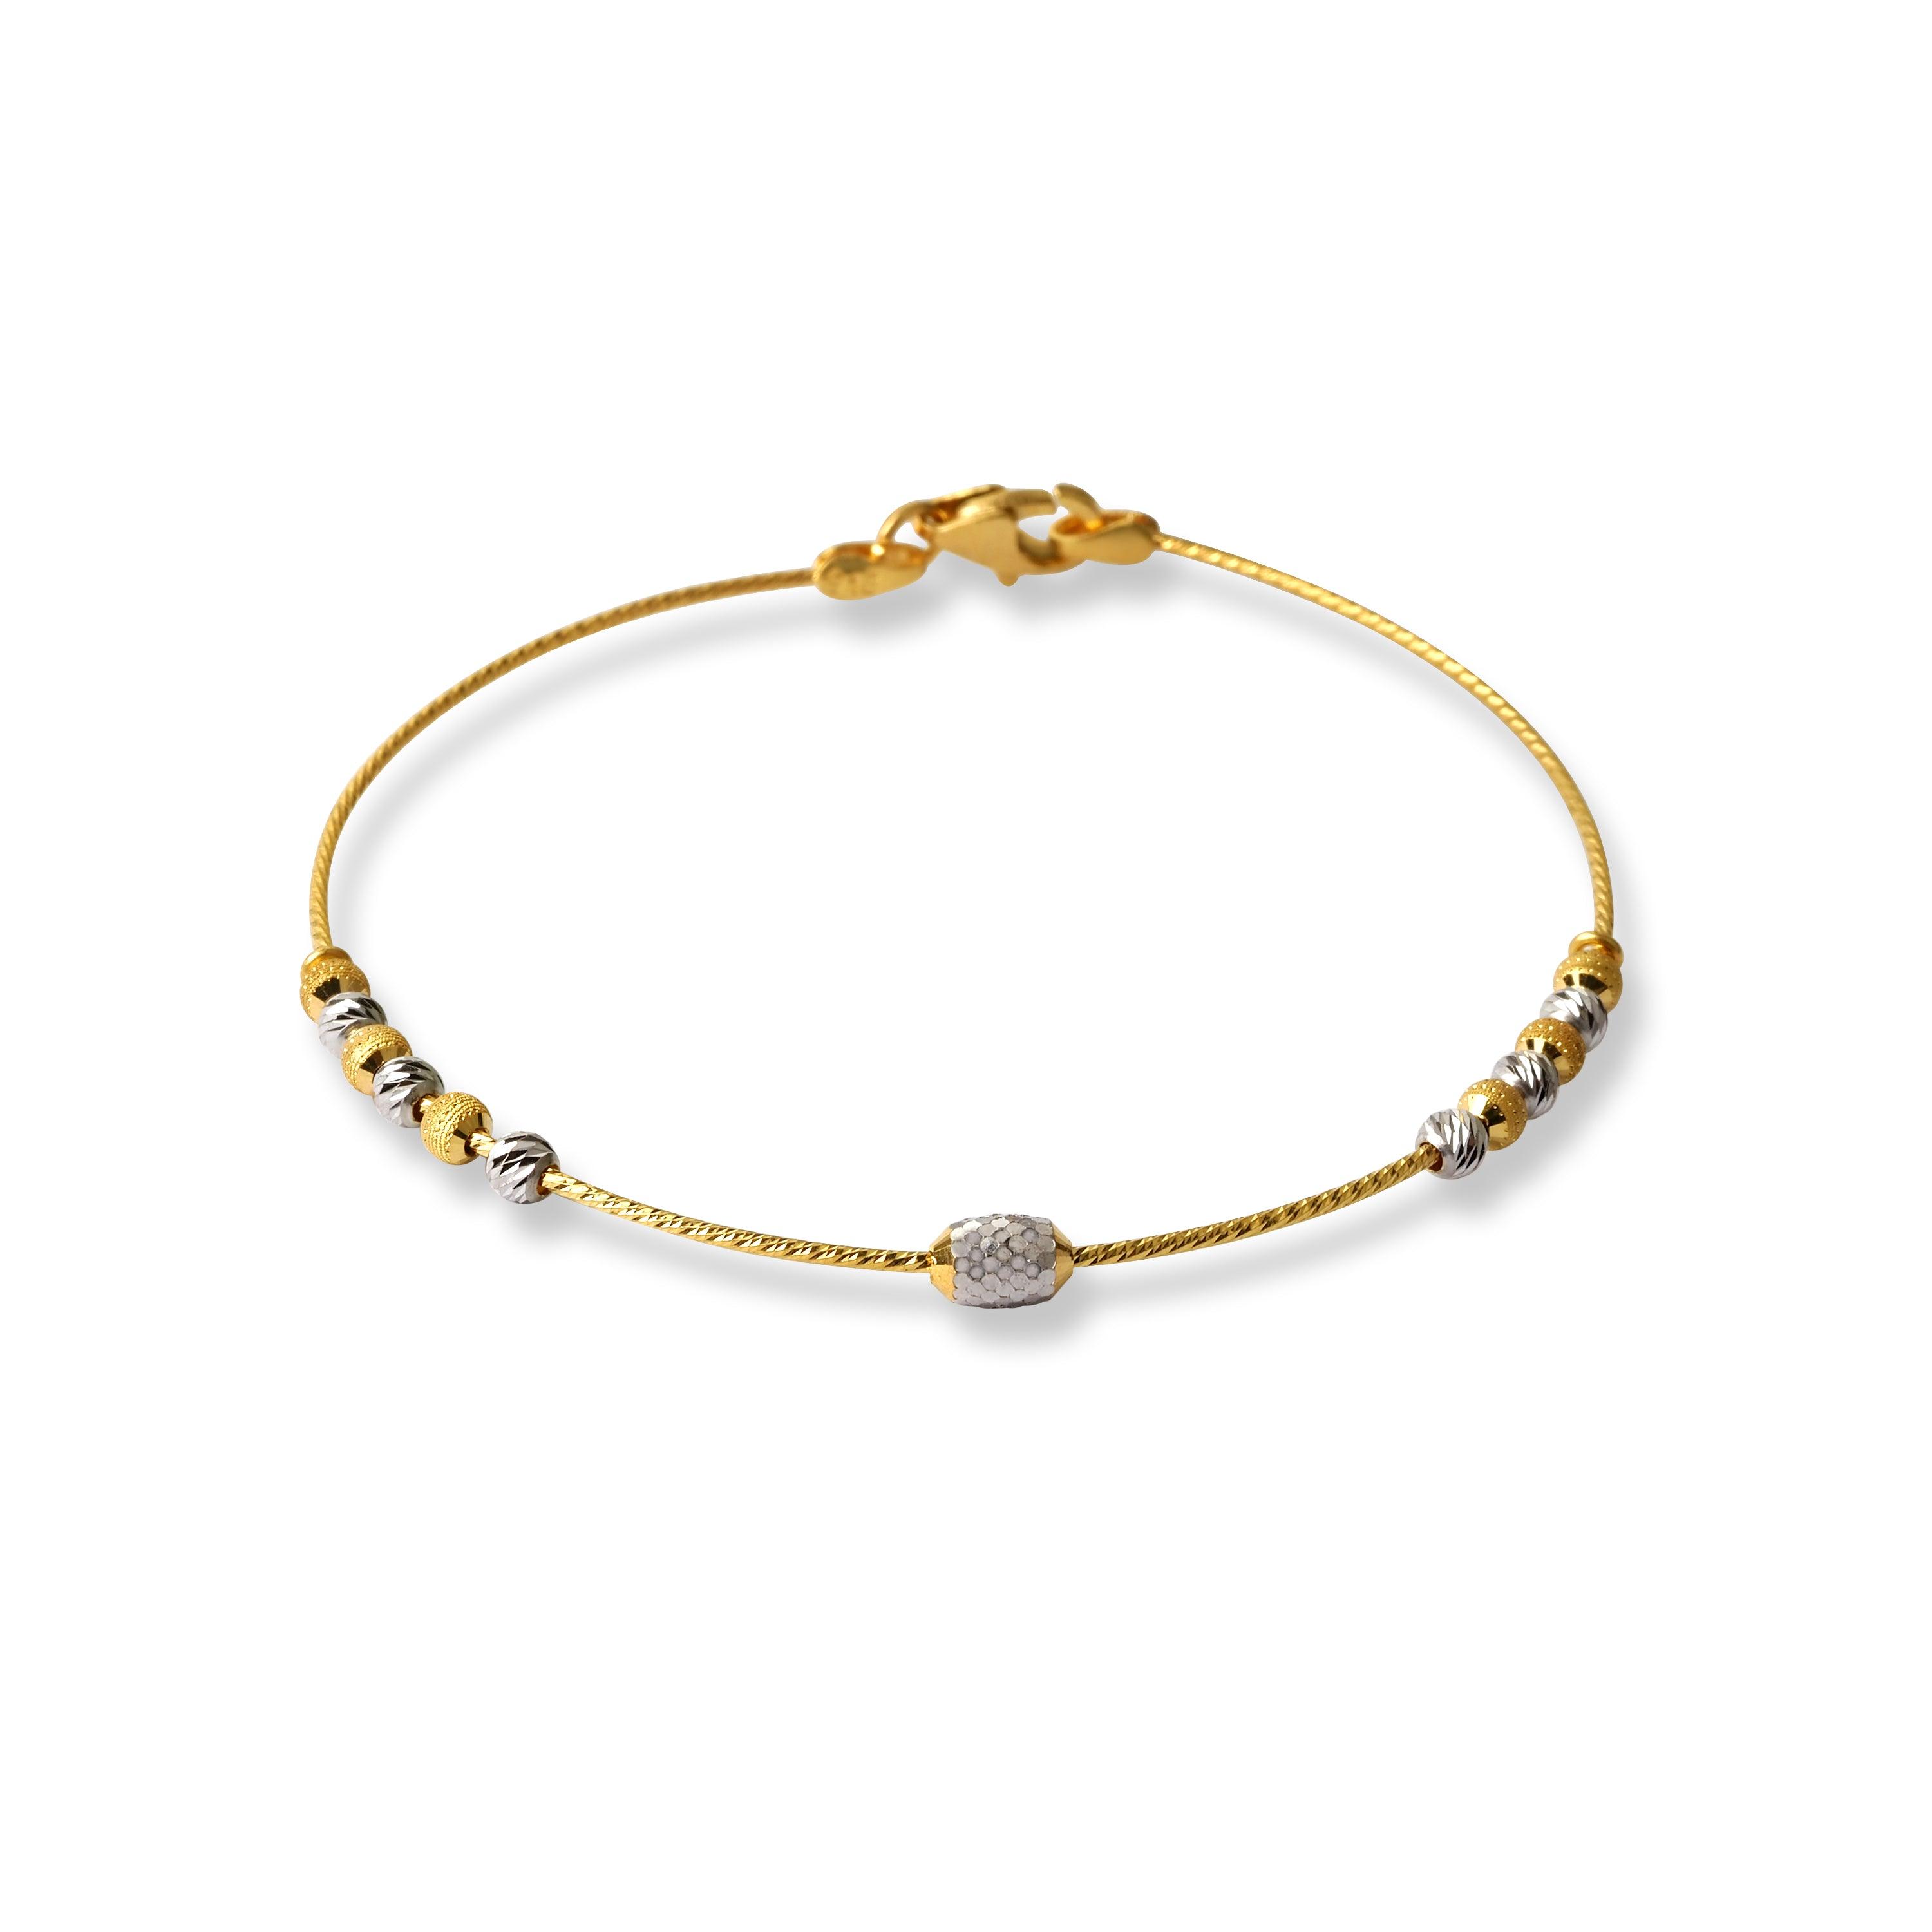 22ct Gold Rhodium Plated Beads Bangle With Rounded Trigger Clasp (4.1g) B-8525 - Minar Jewellers